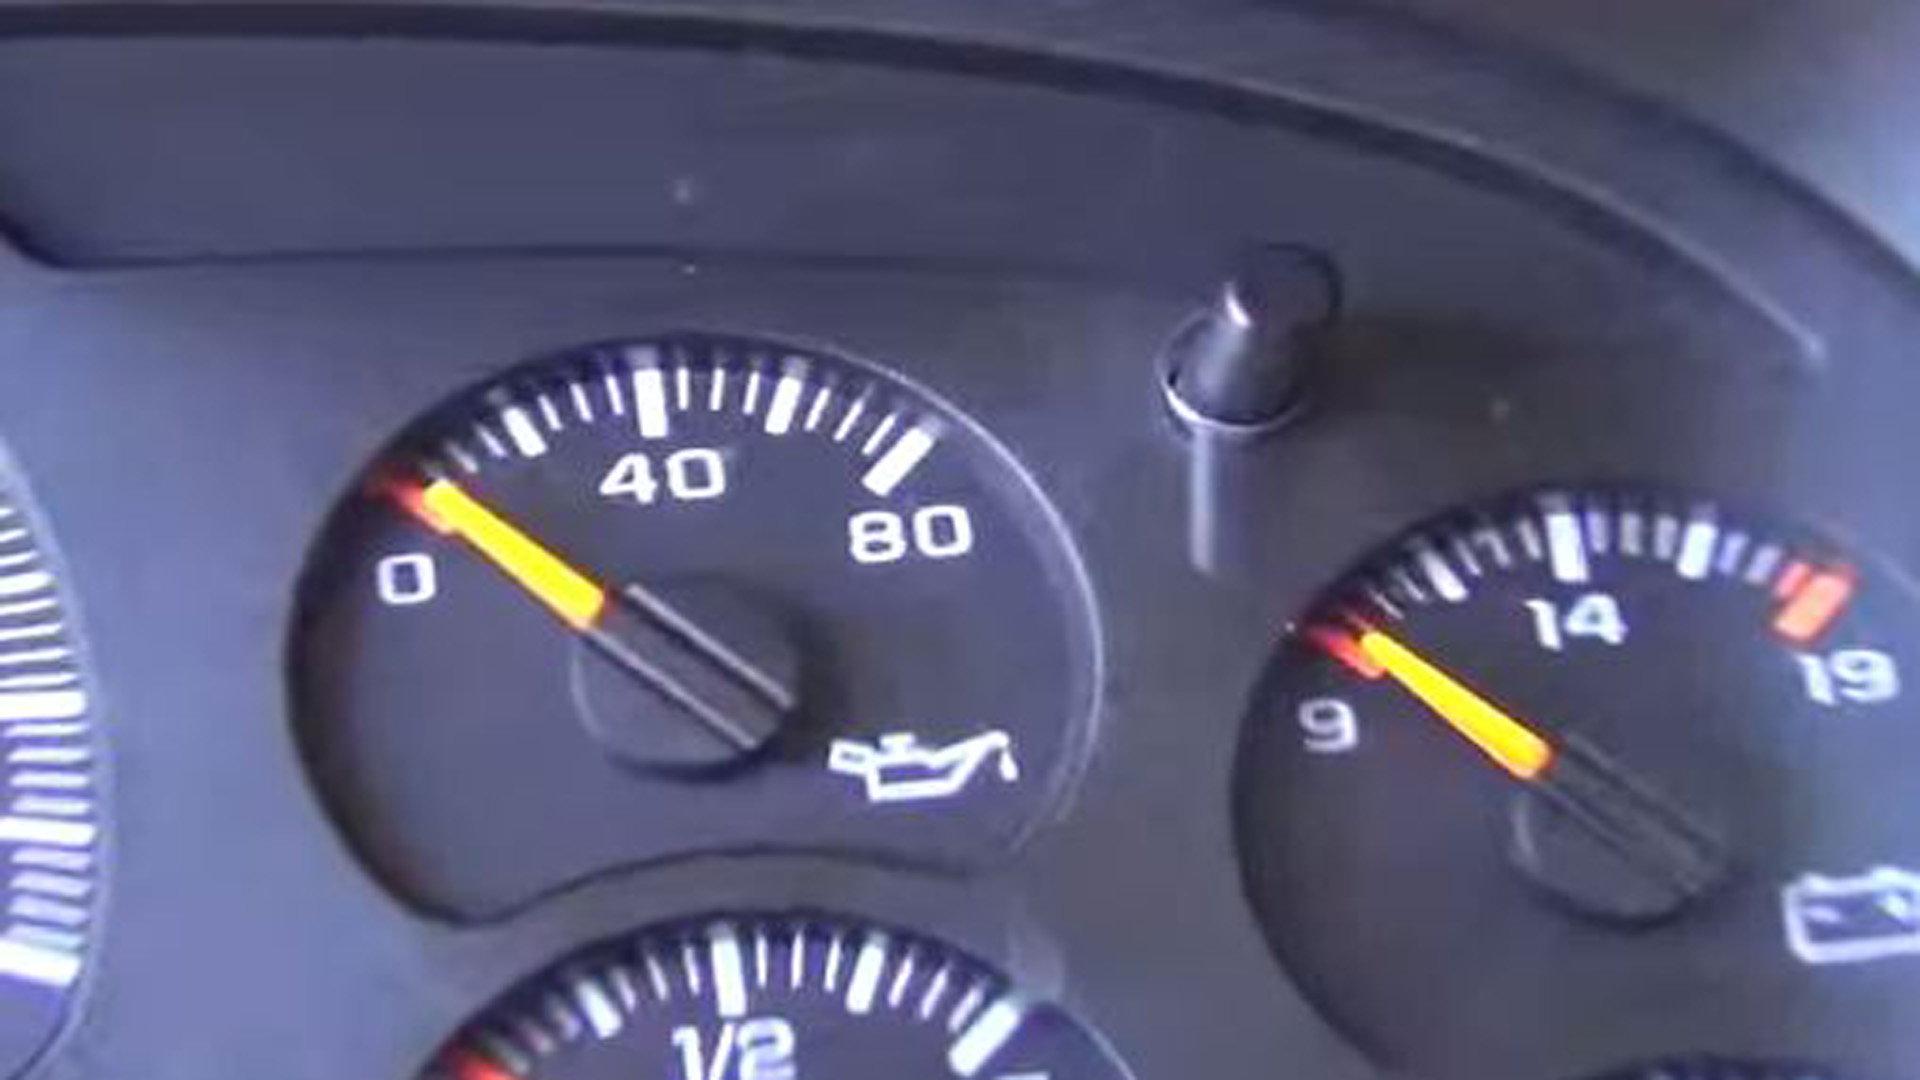 2007 Chevy Impala Oil Pressure Low Stop Engine / How To Tell If Your Chevy Impala Oil Pressure Low Stop Engine